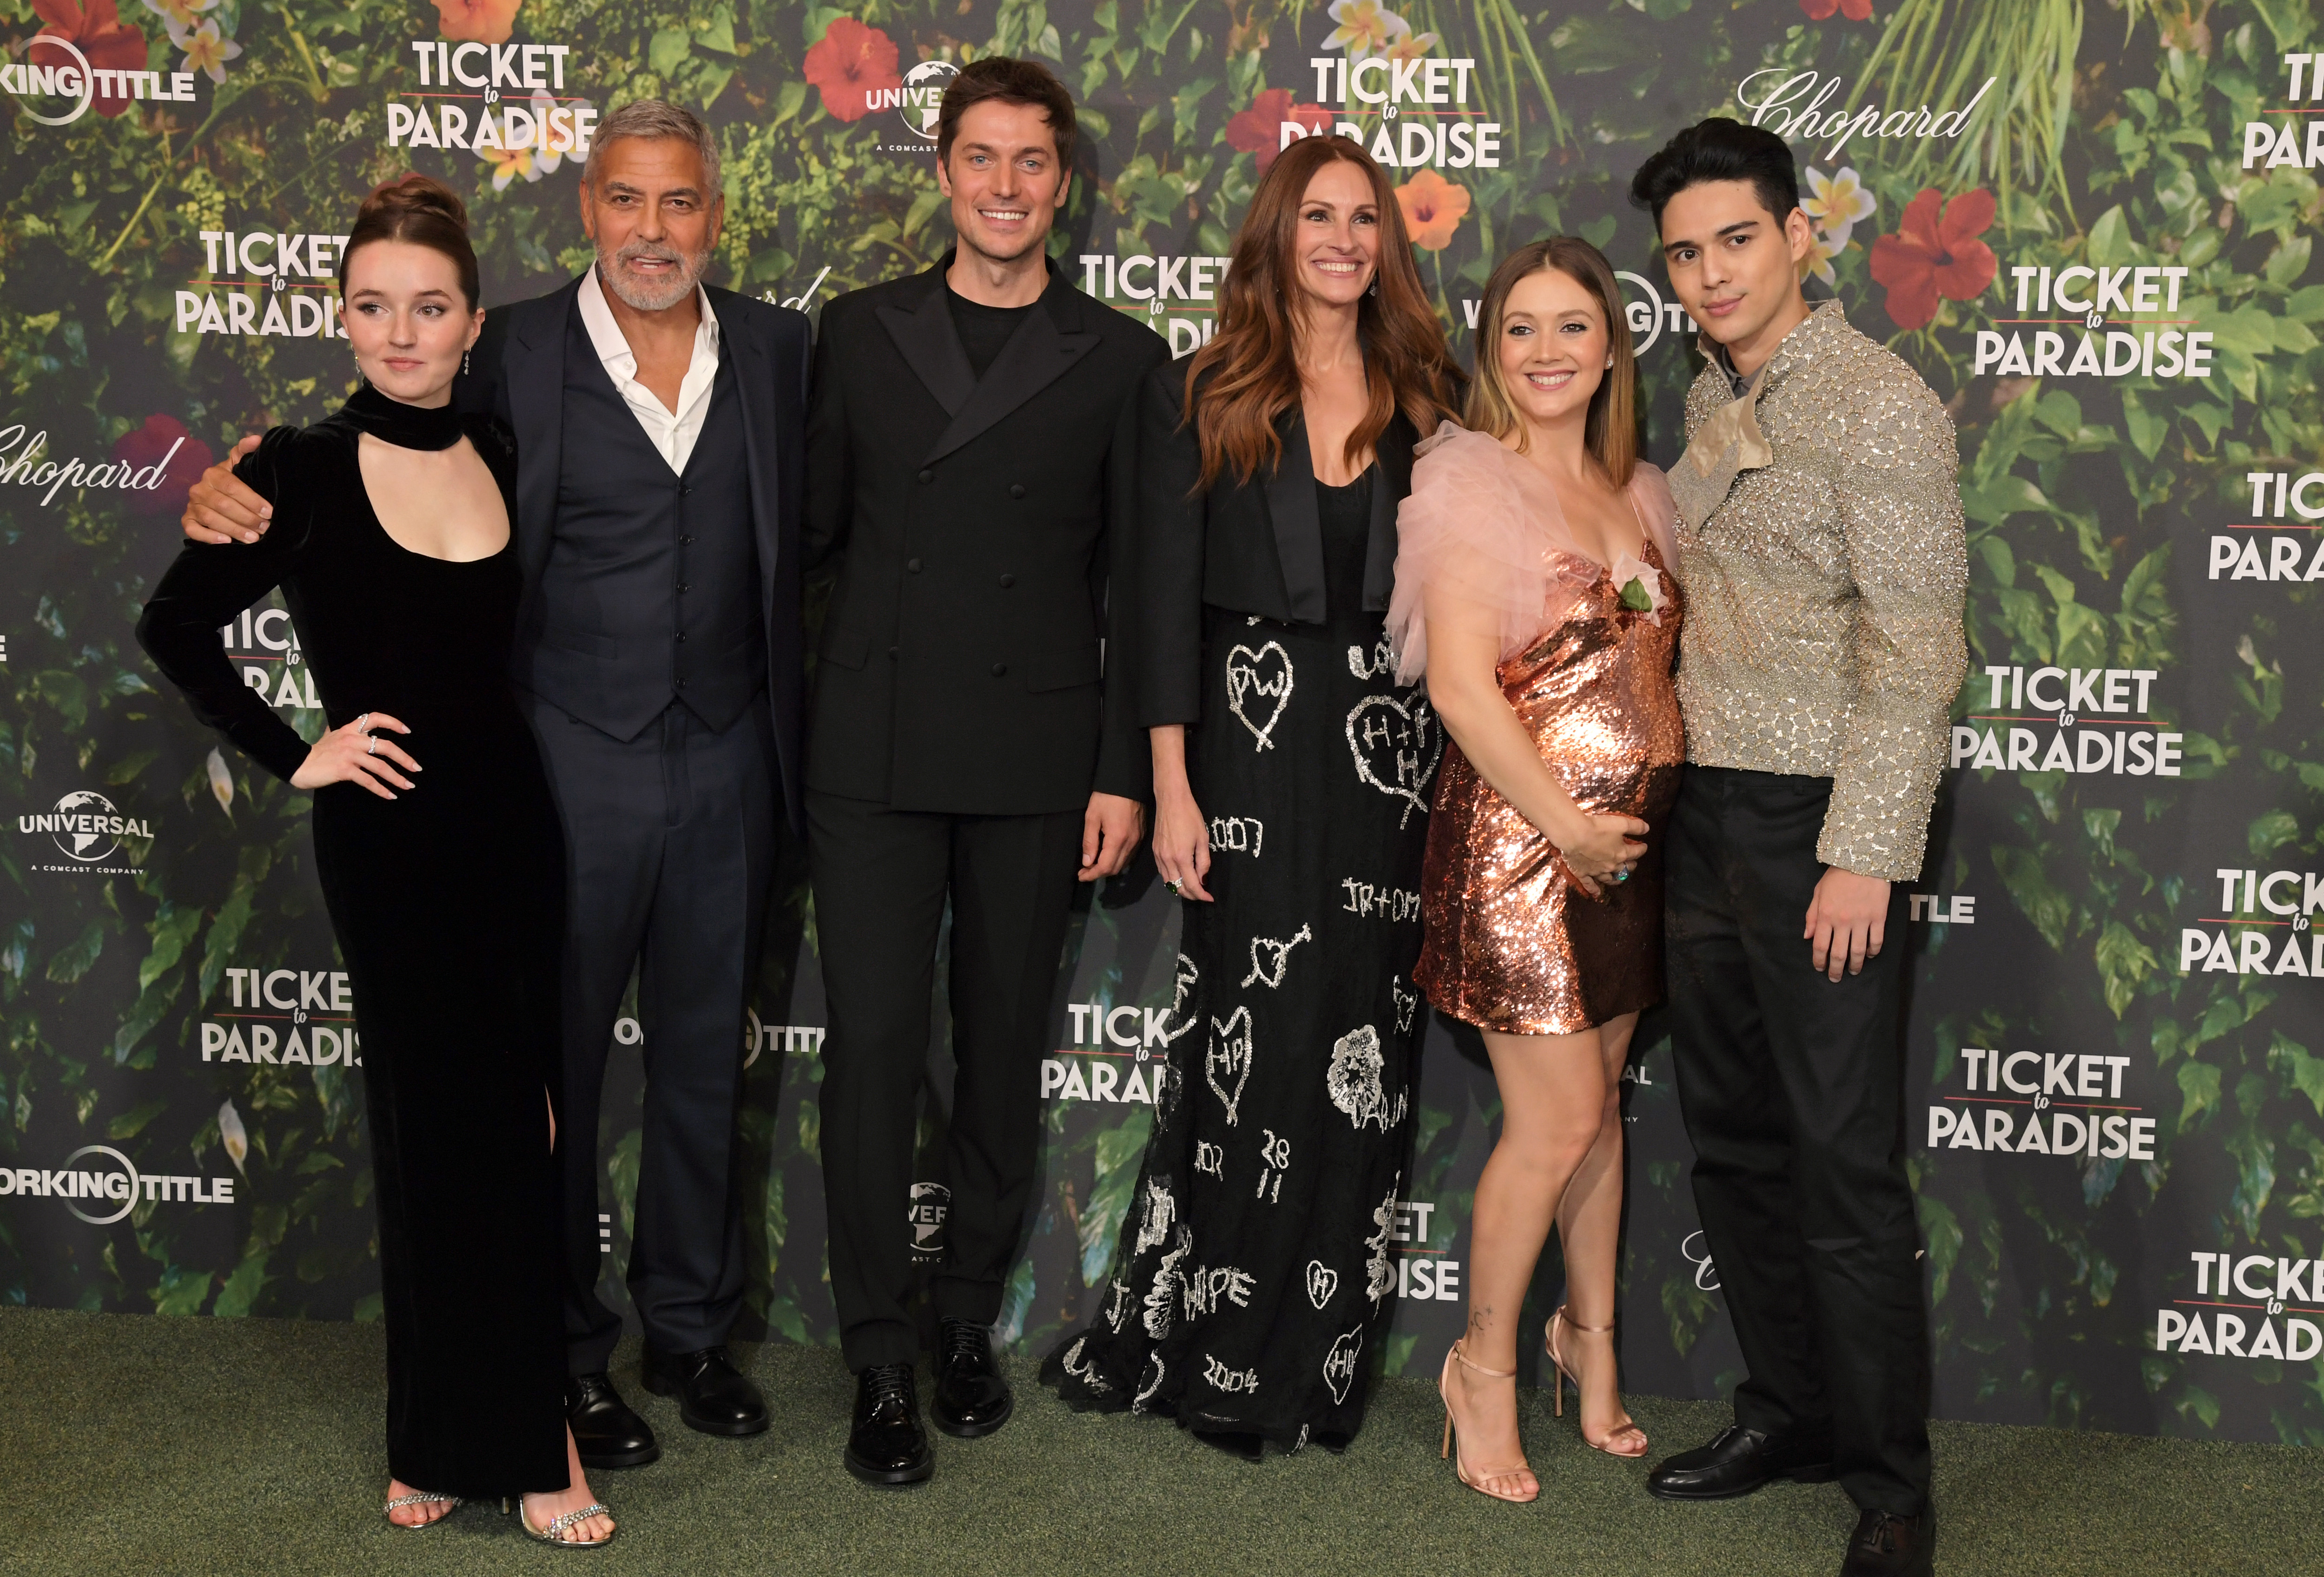 George & Amal Clooney Pose with Julia Roberts at 'Ticket to Paradise'  Premiere!: Photo 4812827  Amal Alamuddin Clooney, George Clooney, Julia  Roberts, Kaitlyn Dever, Lucas Bravo, Maxime Bouttier, Nico Parker, Ol